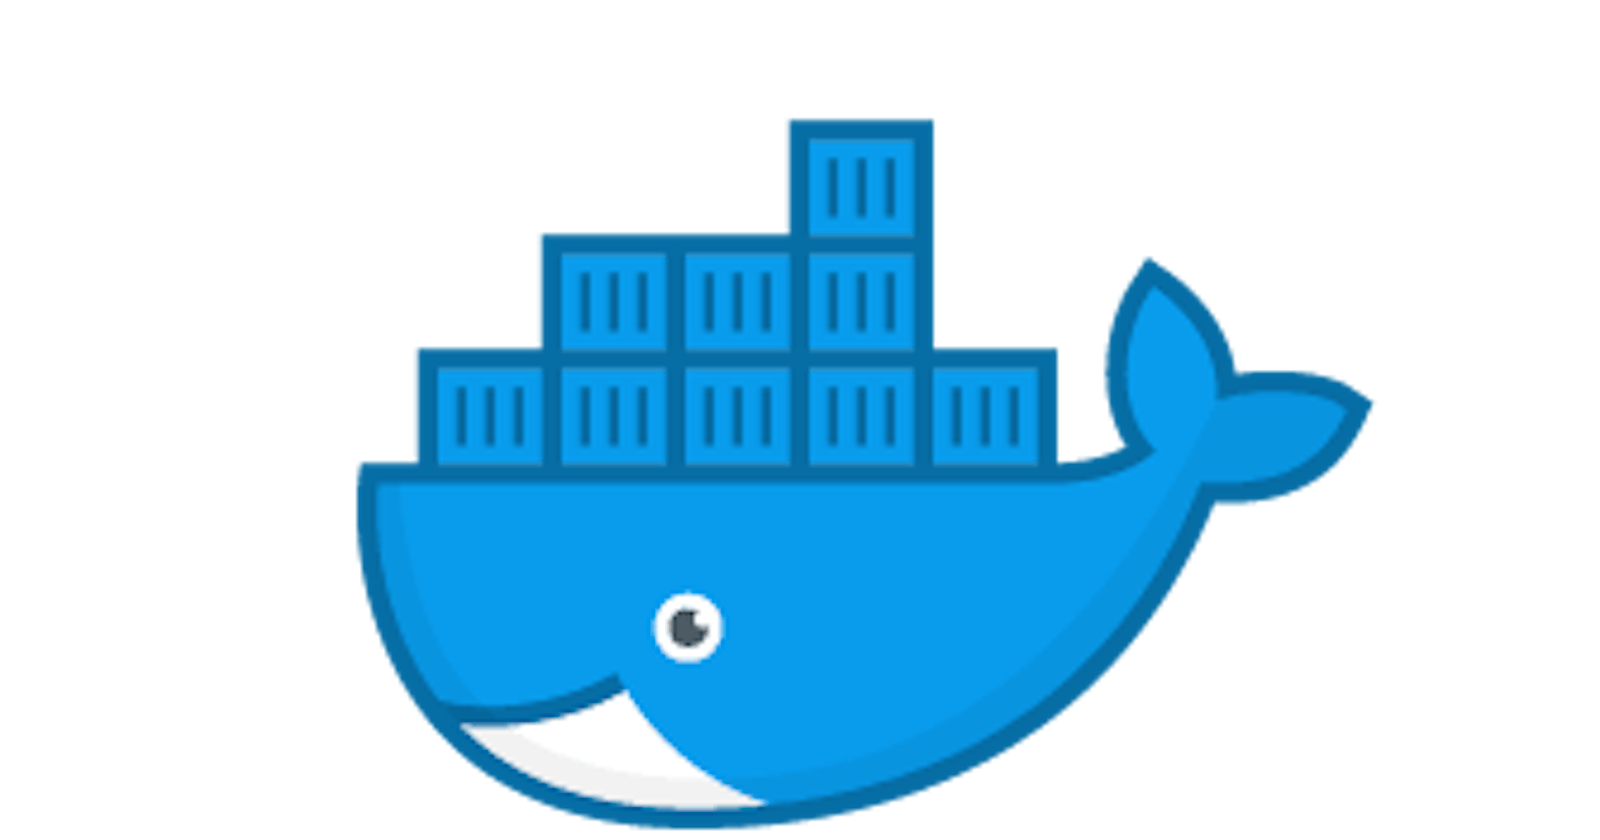 How to Reduce Node Docker Image Size by 10X